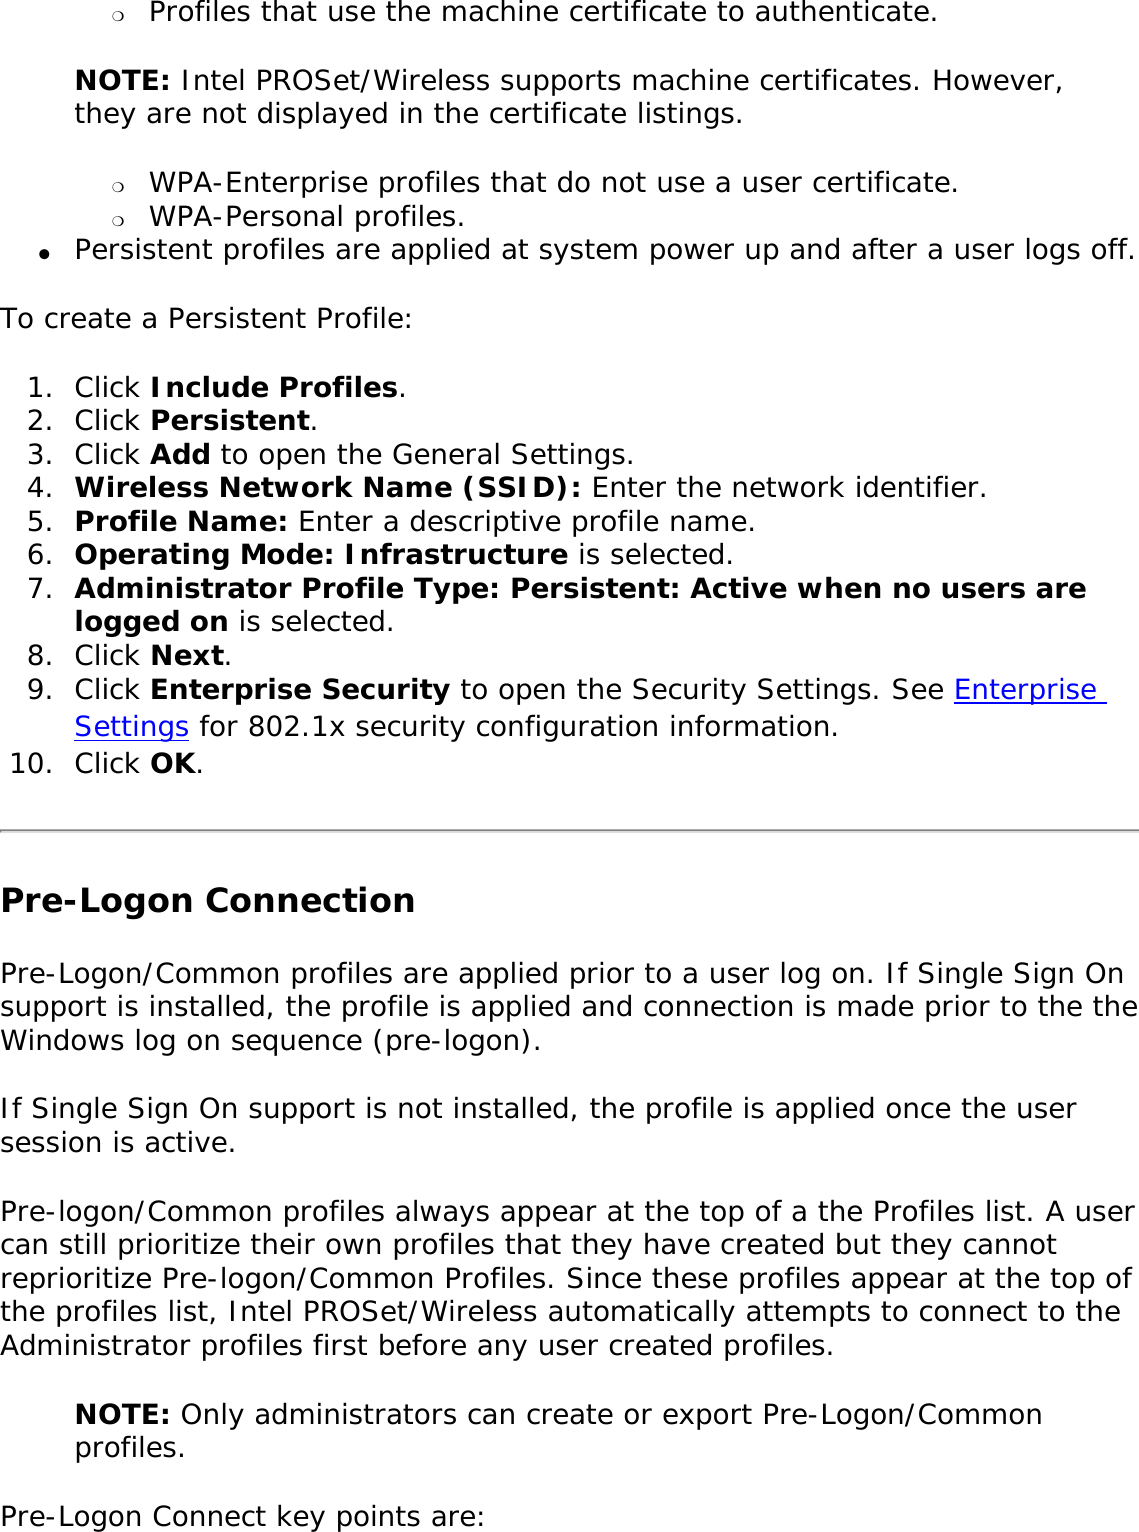 ❍     Profiles that use the machine certificate to authenticate. NOTE: Intel PROSet/Wireless supports machine certificates. However, they are not displayed in the certificate listings. ❍     WPA-Enterprise profiles that do not use a user certificate.❍     WPA-Personal profiles.●     Persistent profiles are applied at system power up and after a user logs off.To create a Persistent Profile: 1.  Click Include Profiles.2.  Click Persistent.3.  Click Add to open the General Settings. 4.  Wireless Network Name (SSID): Enter the network identifier. 5.  Profile Name: Enter a descriptive profile name.6.  Operating Mode: Infrastructure is selected. 7.  Administrator Profile Type: Persistent: Active when no users are logged on is selected. 8.  Click Next. 9.  Click Enterprise Security to open the Security Settings. See Enterprise Settings for 802.1x security configuration information. 10.  Click OK. Pre-Logon Connection Pre-Logon/Common profiles are applied prior to a user log on. If Single Sign On support is installed, the profile is applied and connection is made prior to the the Windows log on sequence (pre-logon). If Single Sign On support is not installed, the profile is applied once the user session is active. Pre-logon/Common profiles always appear at the top of a the Profiles list. A user can still prioritize their own profiles that they have created but they cannot reprioritize Pre-logon/Common Profiles. Since these profiles appear at the top of the profiles list, Intel PROSet/Wireless automatically attempts to connect to the Administrator profiles first before any user created profiles. NOTE: Only administrators can create or export Pre-Logon/Common profiles. Pre-Logon Connect key points are: 